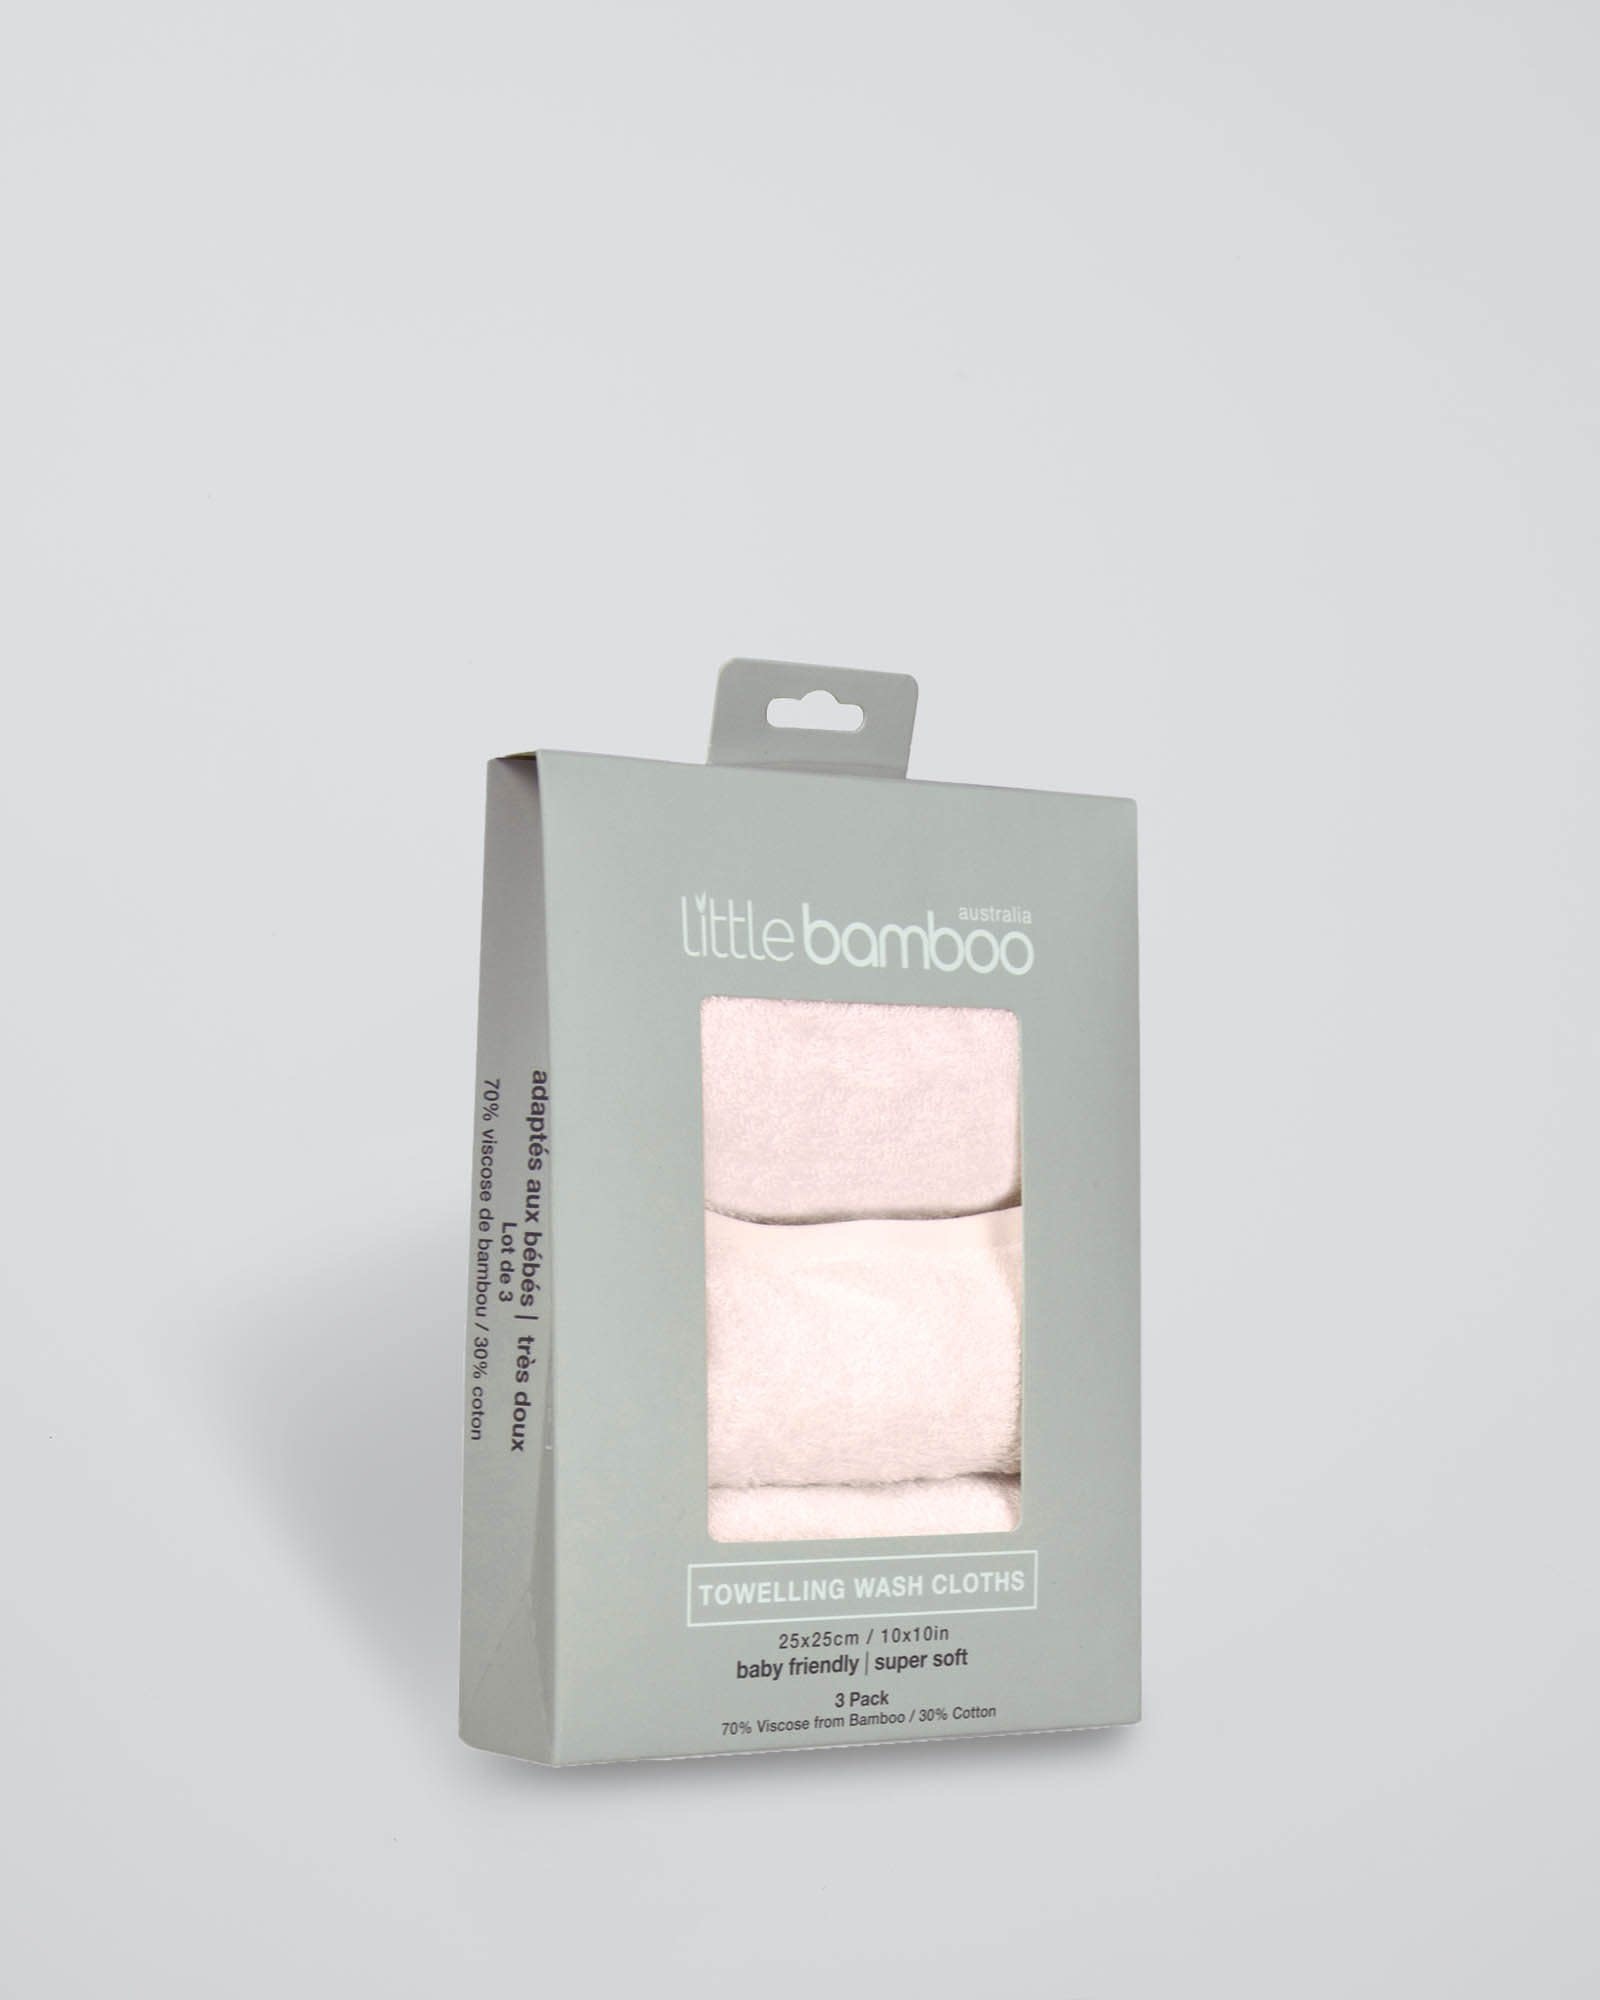 Little Bamboo Little Bamboo Towelling Wash Cloths 3 Pack